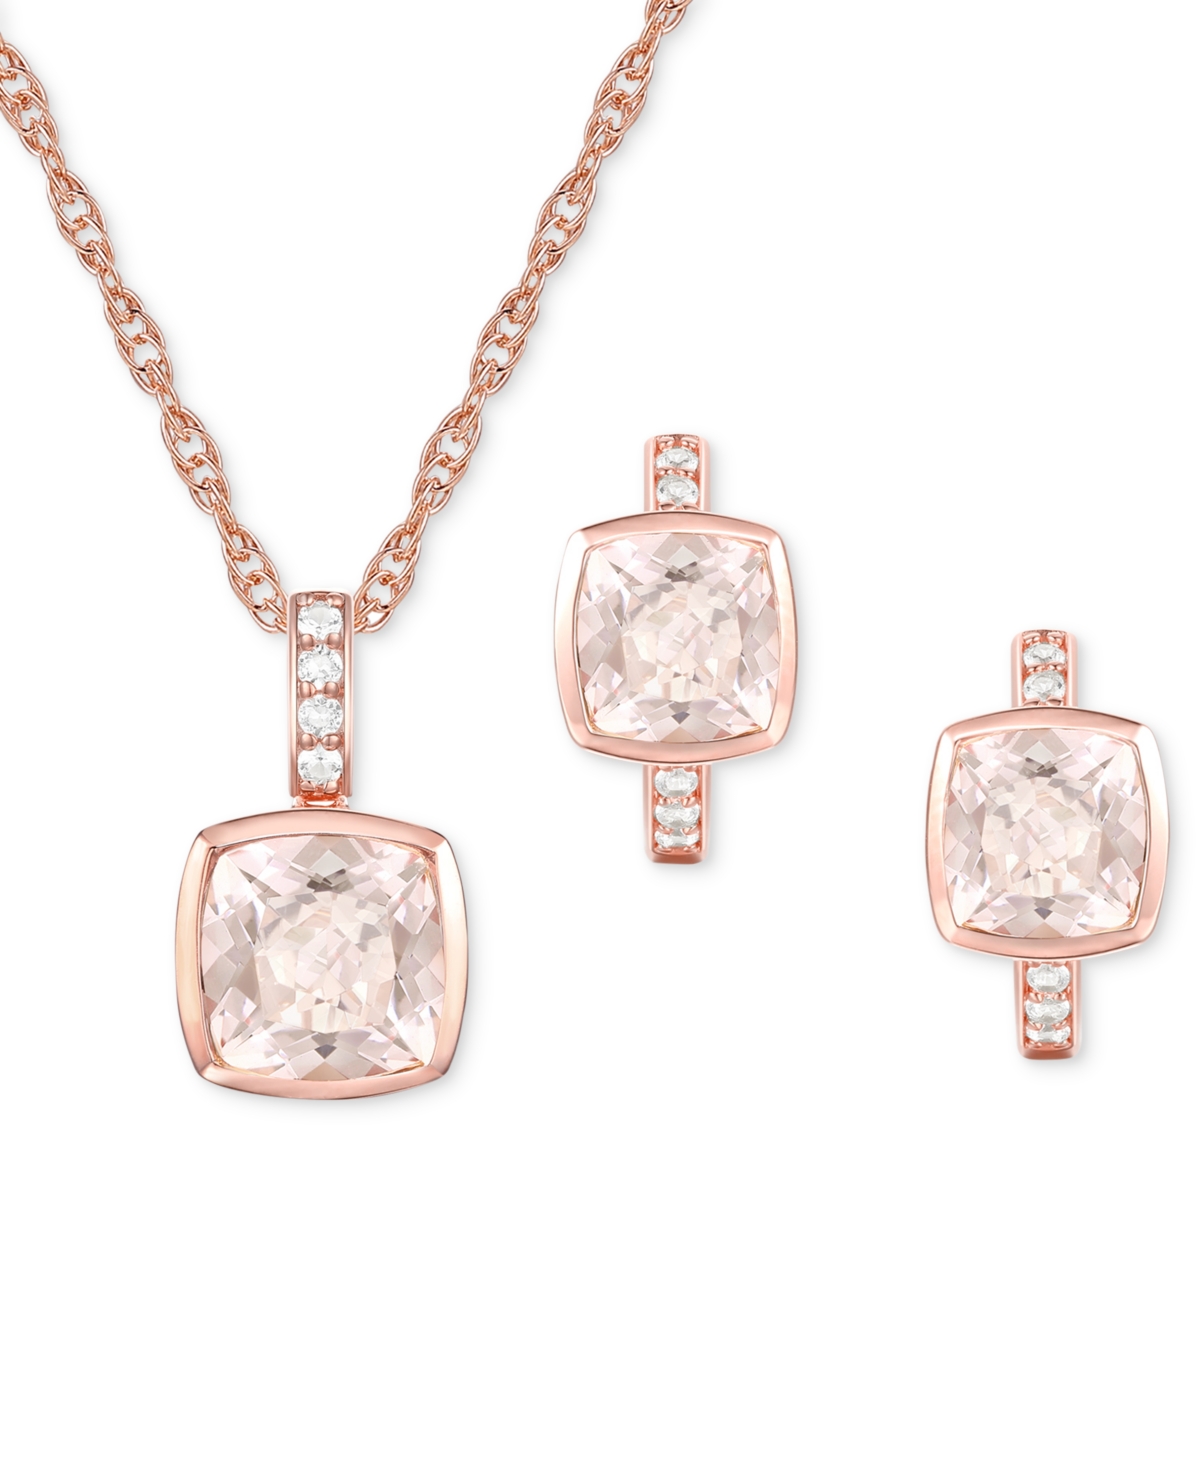 Macy's 2-pc. Set Amethyst (3-1/5 Ct. T.w.) & Lab-grown White Sapphire (1/20 Ct. T.w.) Pendant Necklace & Ma In Morganite